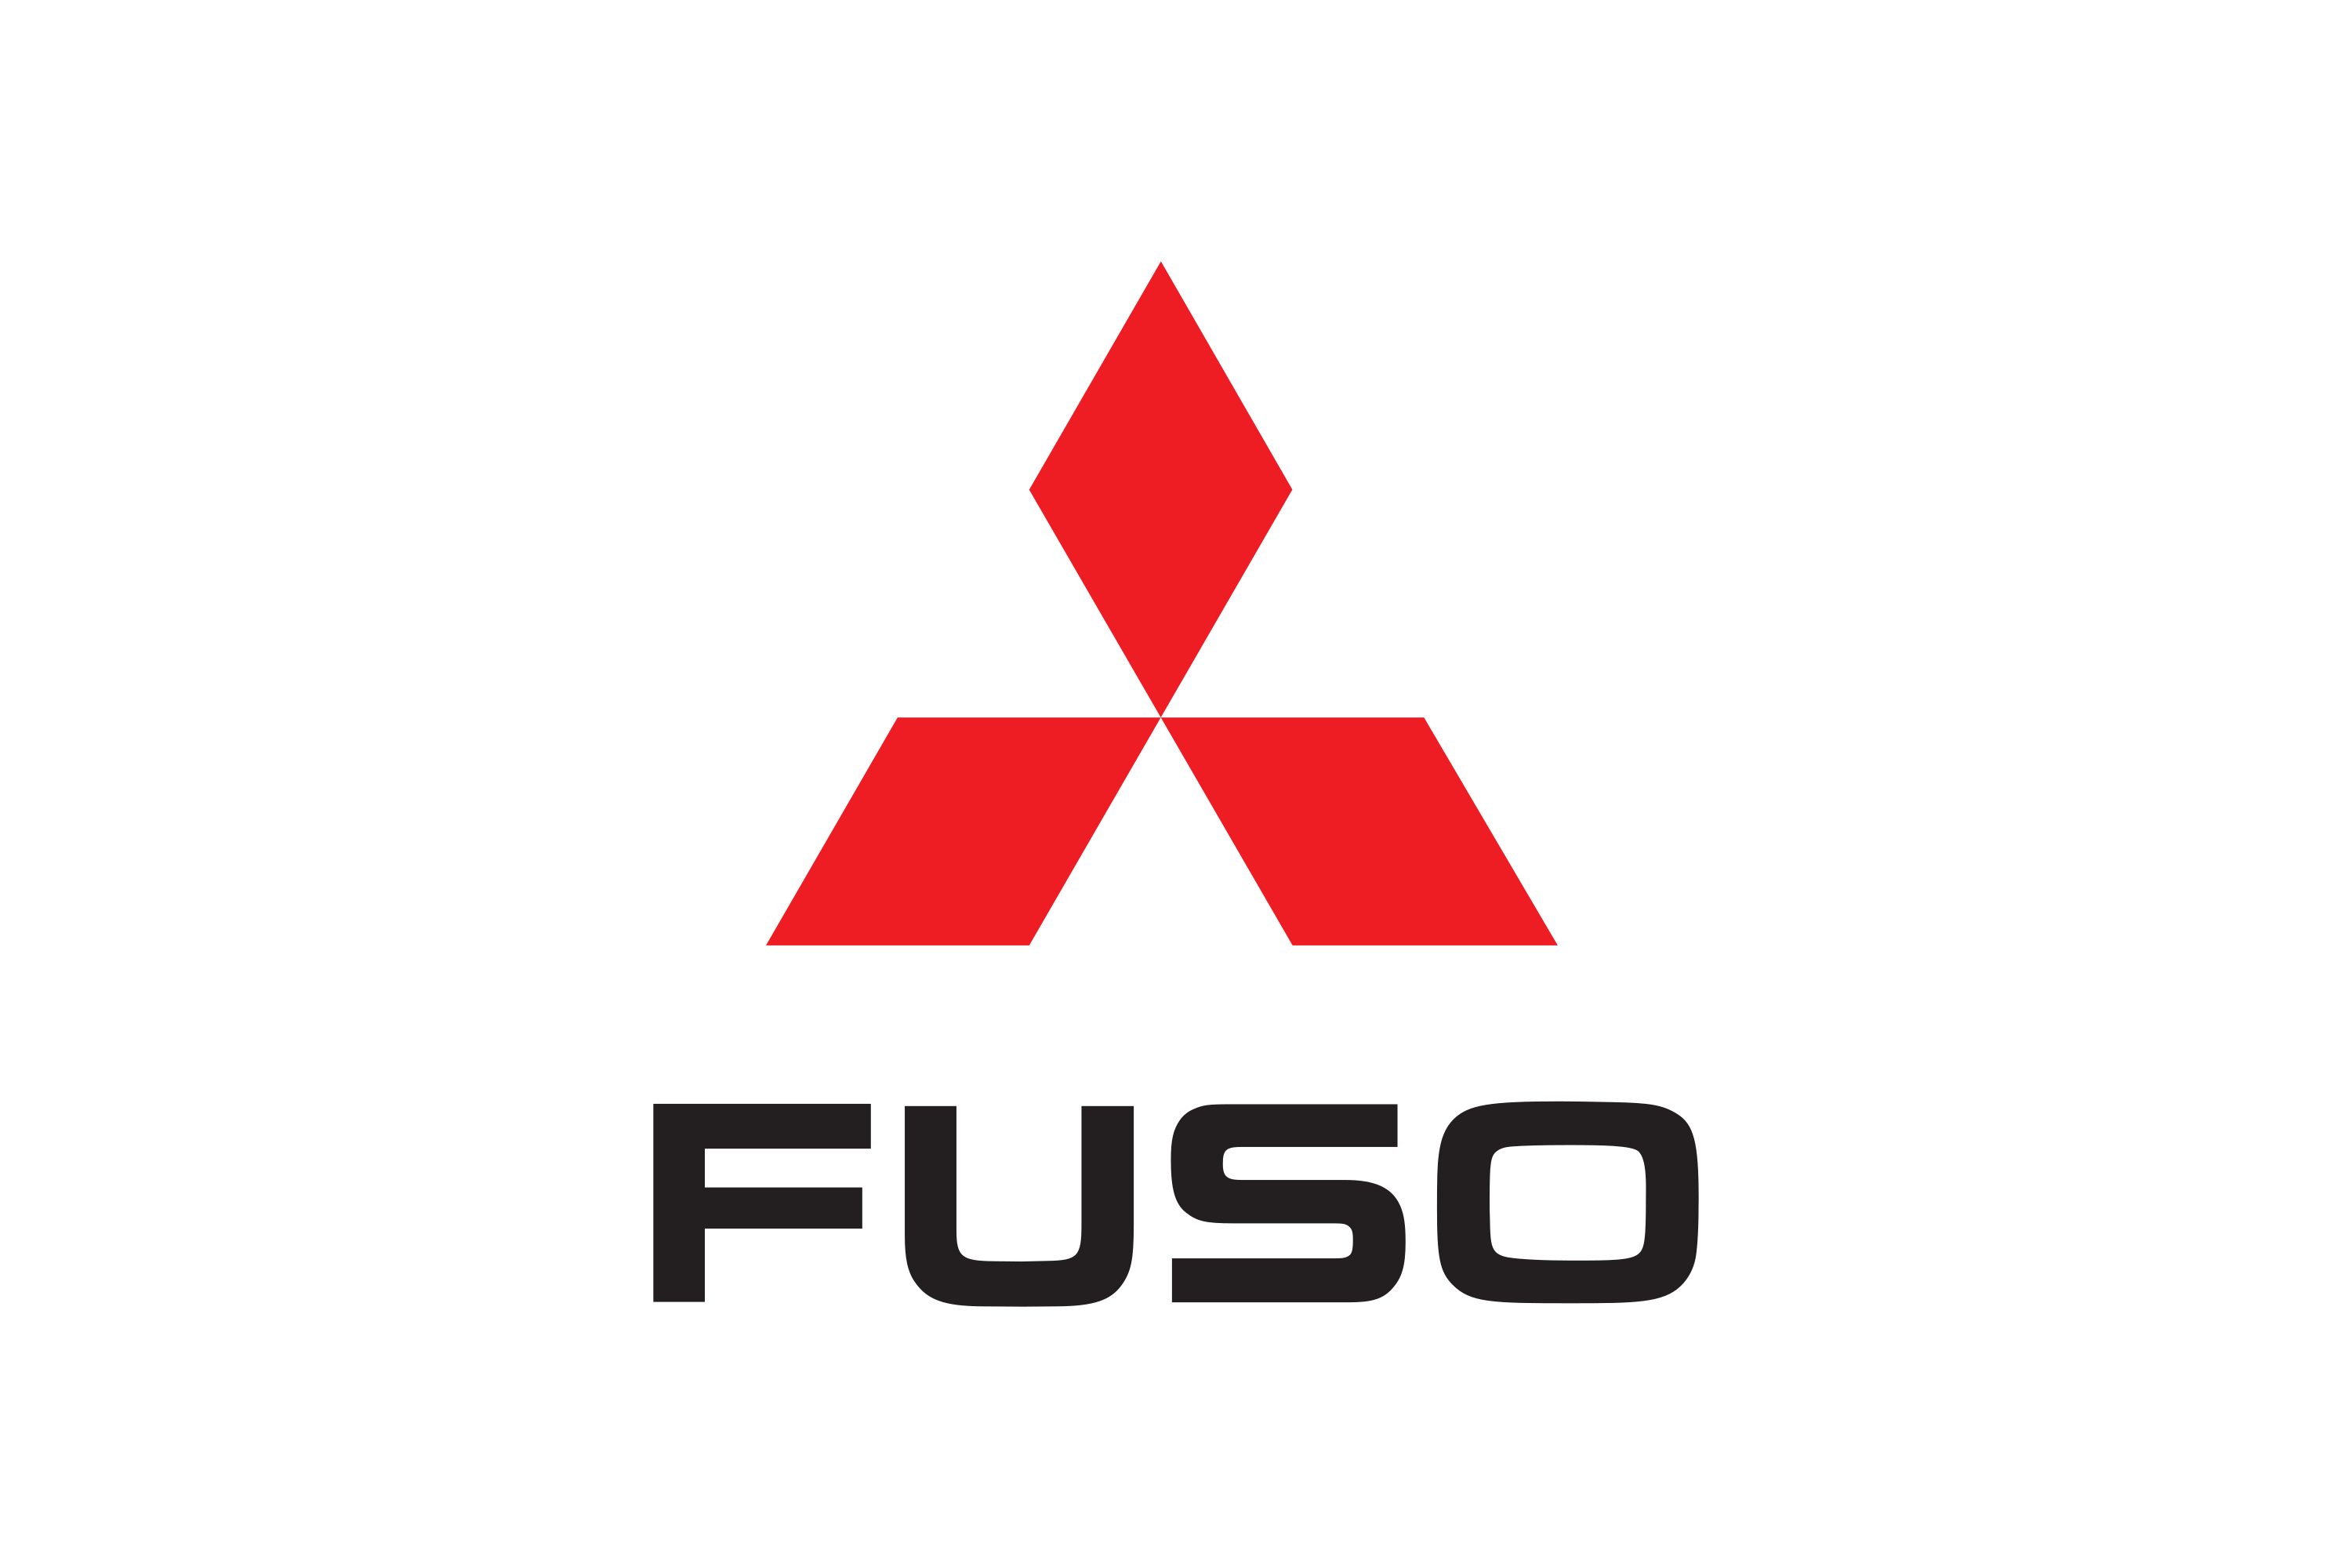 Download Mitsubishi Fuso Truck and Bus Corporation Logo in SVG Vector